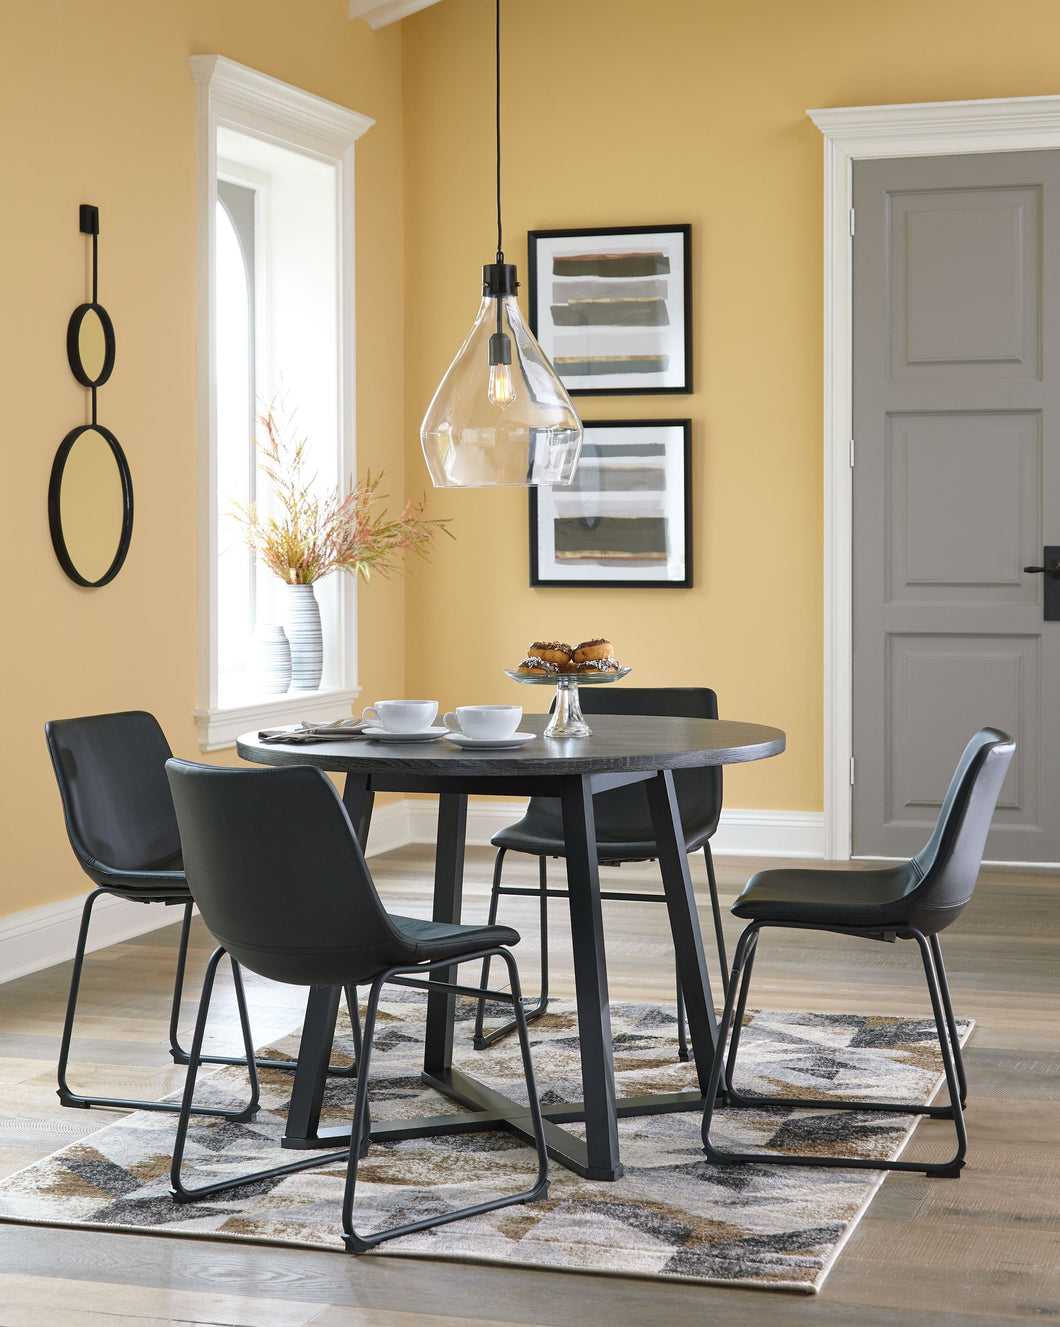 Centiar Black / Gray 5 Pc. Round Dining Room Table, 4 Side Chairs